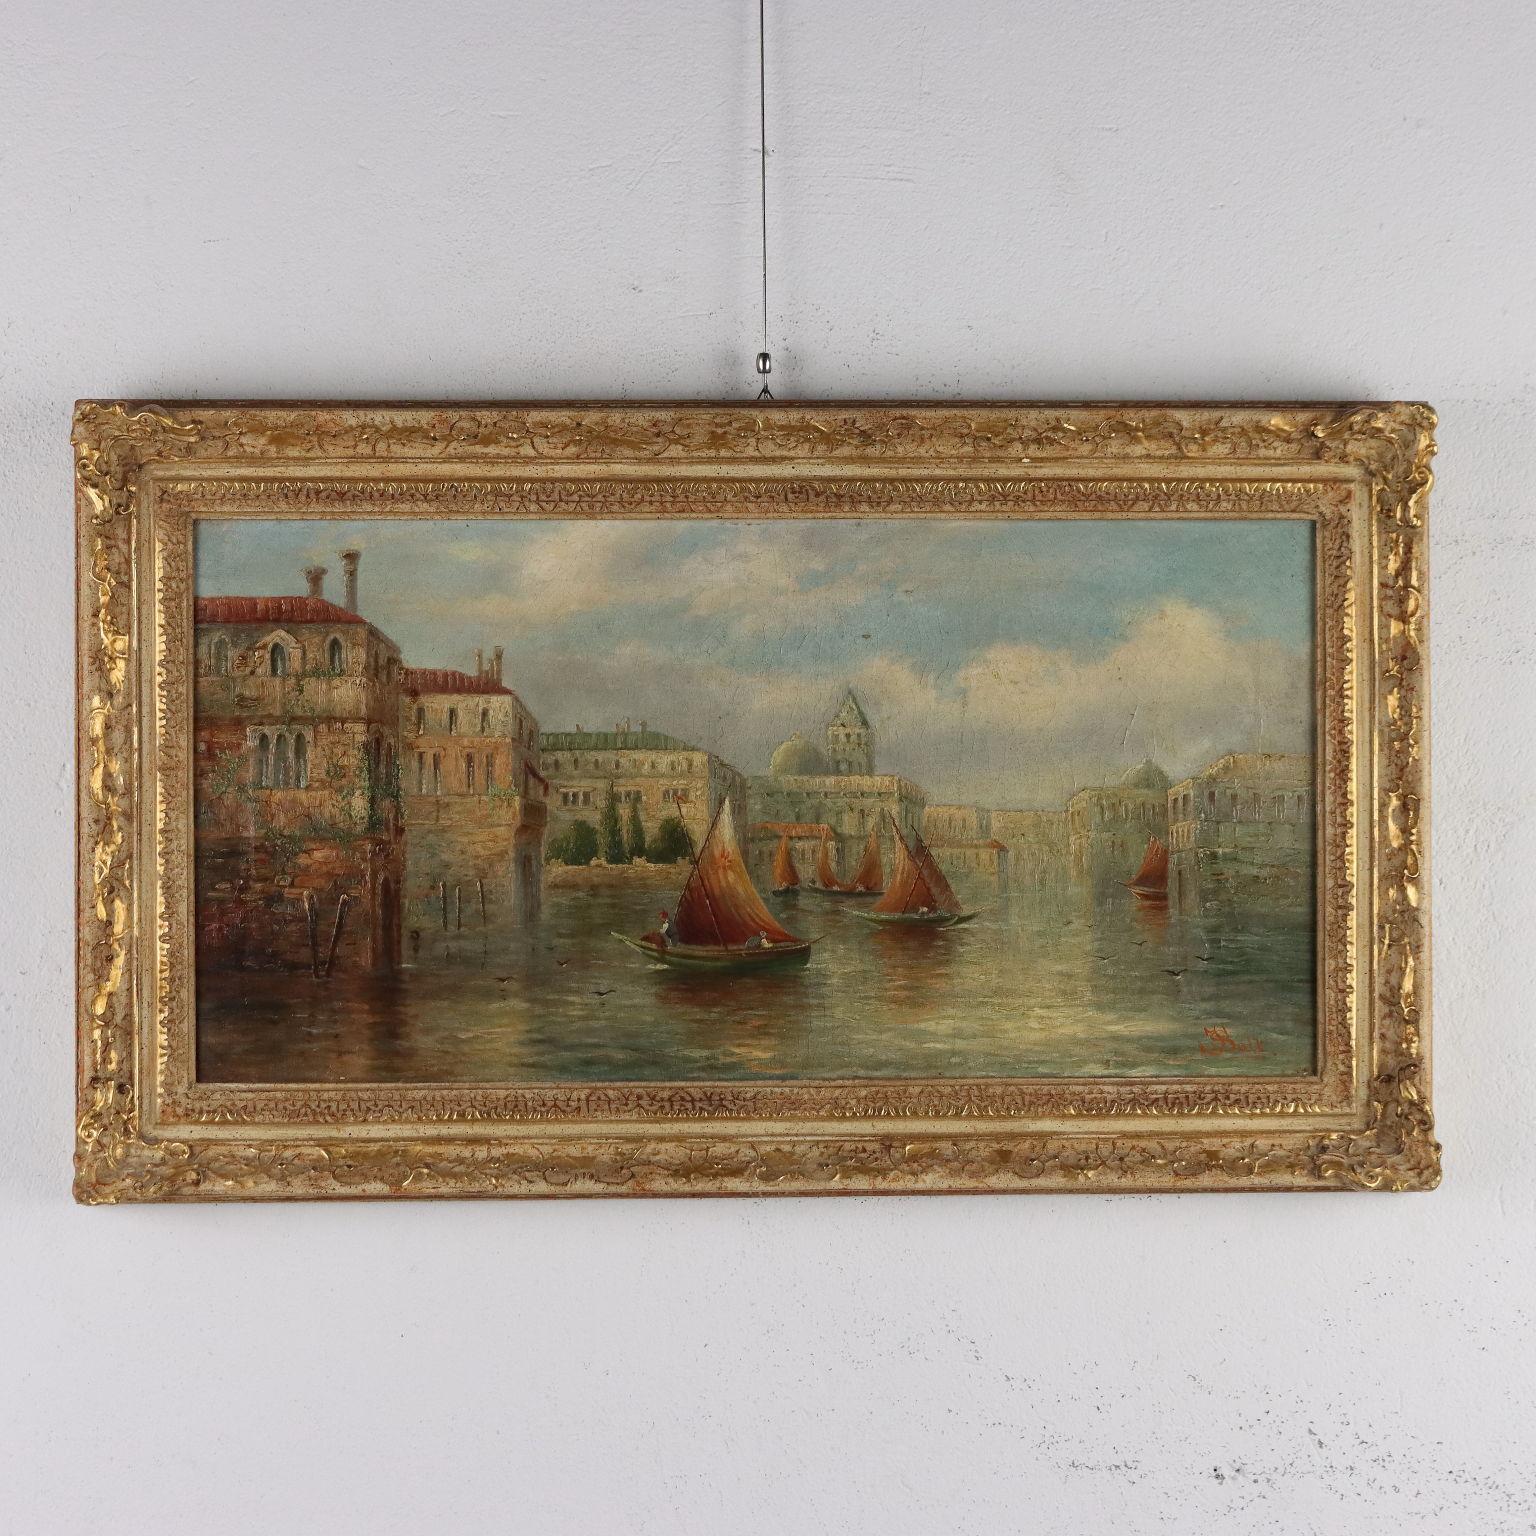 View Of Venice, 19th century - Painting by James Salt